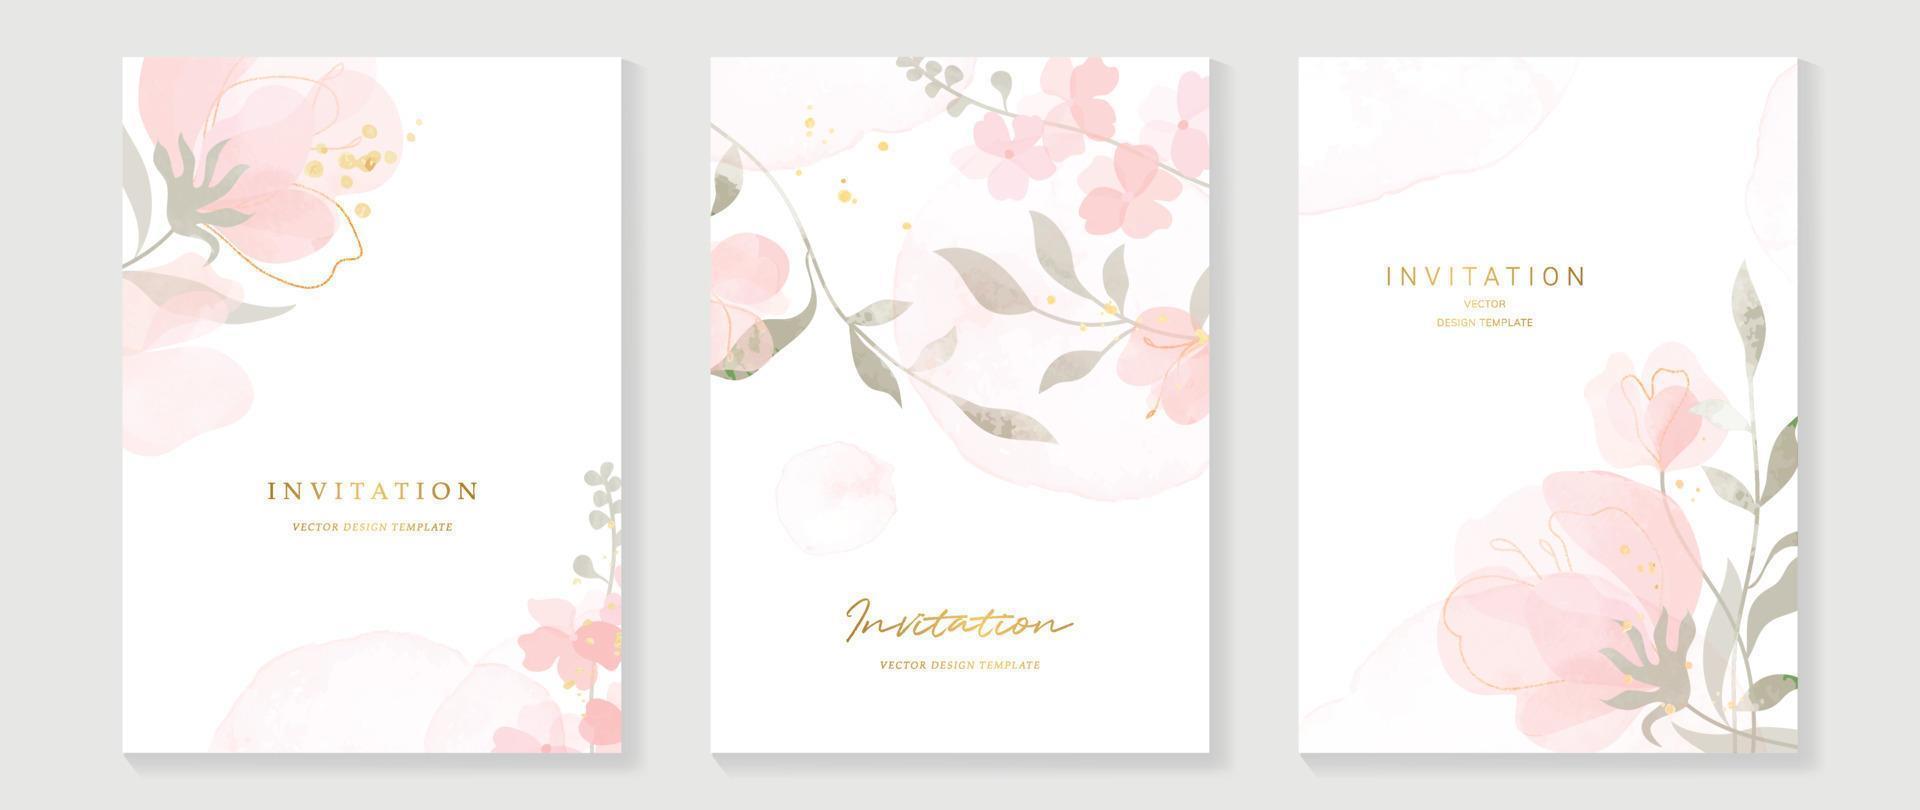 Luxury wedding invitation card background vector. Elegant watercolor texture in pink flower, leaf, gold line. Spring floral design illustration for wedding and vip cover template, banner, invite. vector